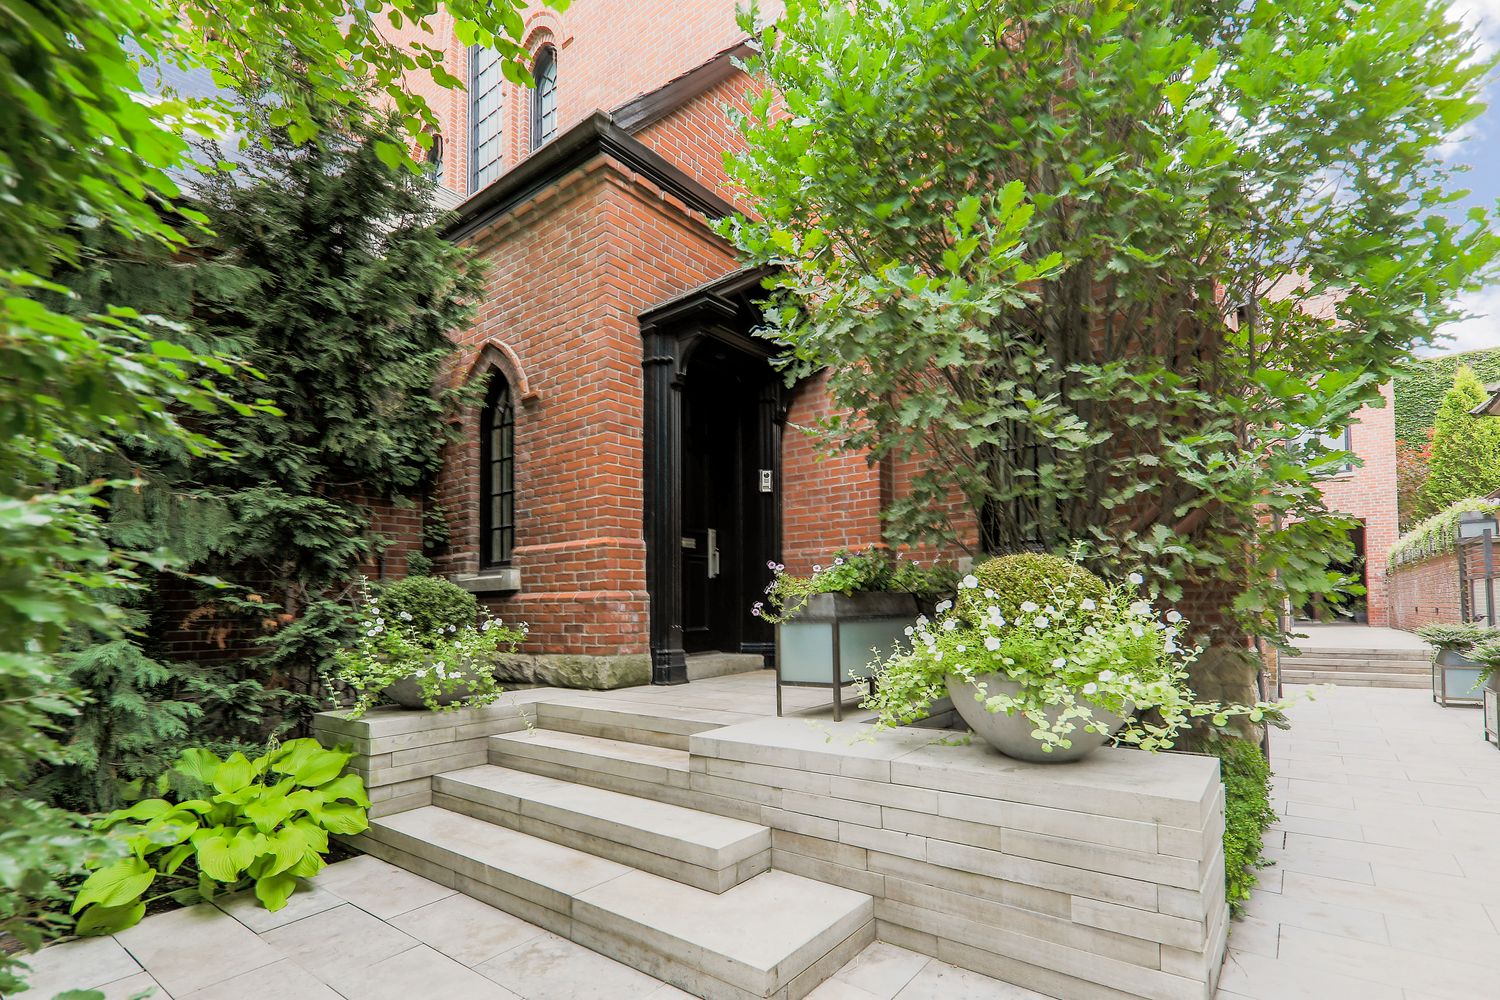 12 Macpherson Avenue. Macpherson Church Lofts is located in  Midtown, Toronto - image #3 of 5